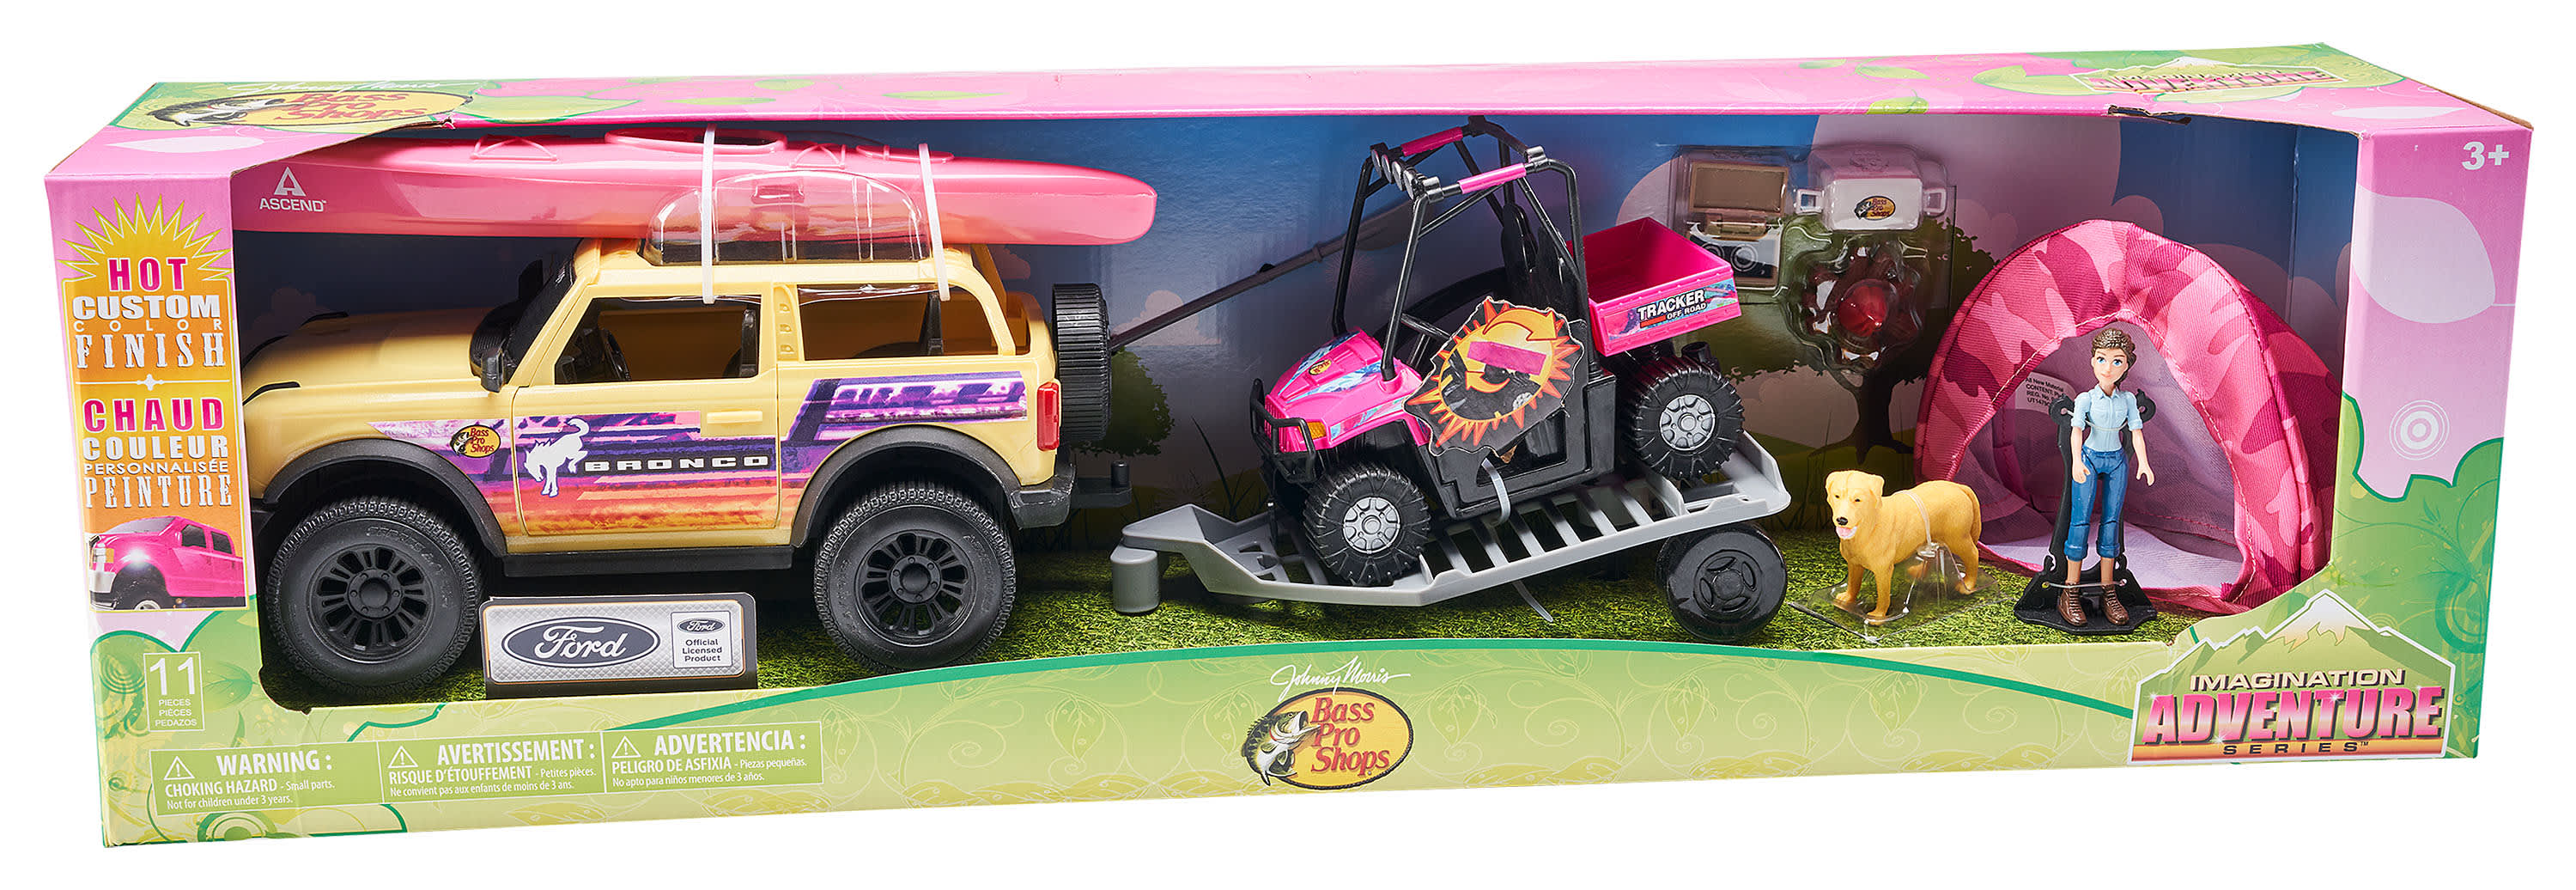 Bass Pro Shops® Deluxe Ford® Bronco® Camping Adventure Playset for Kids